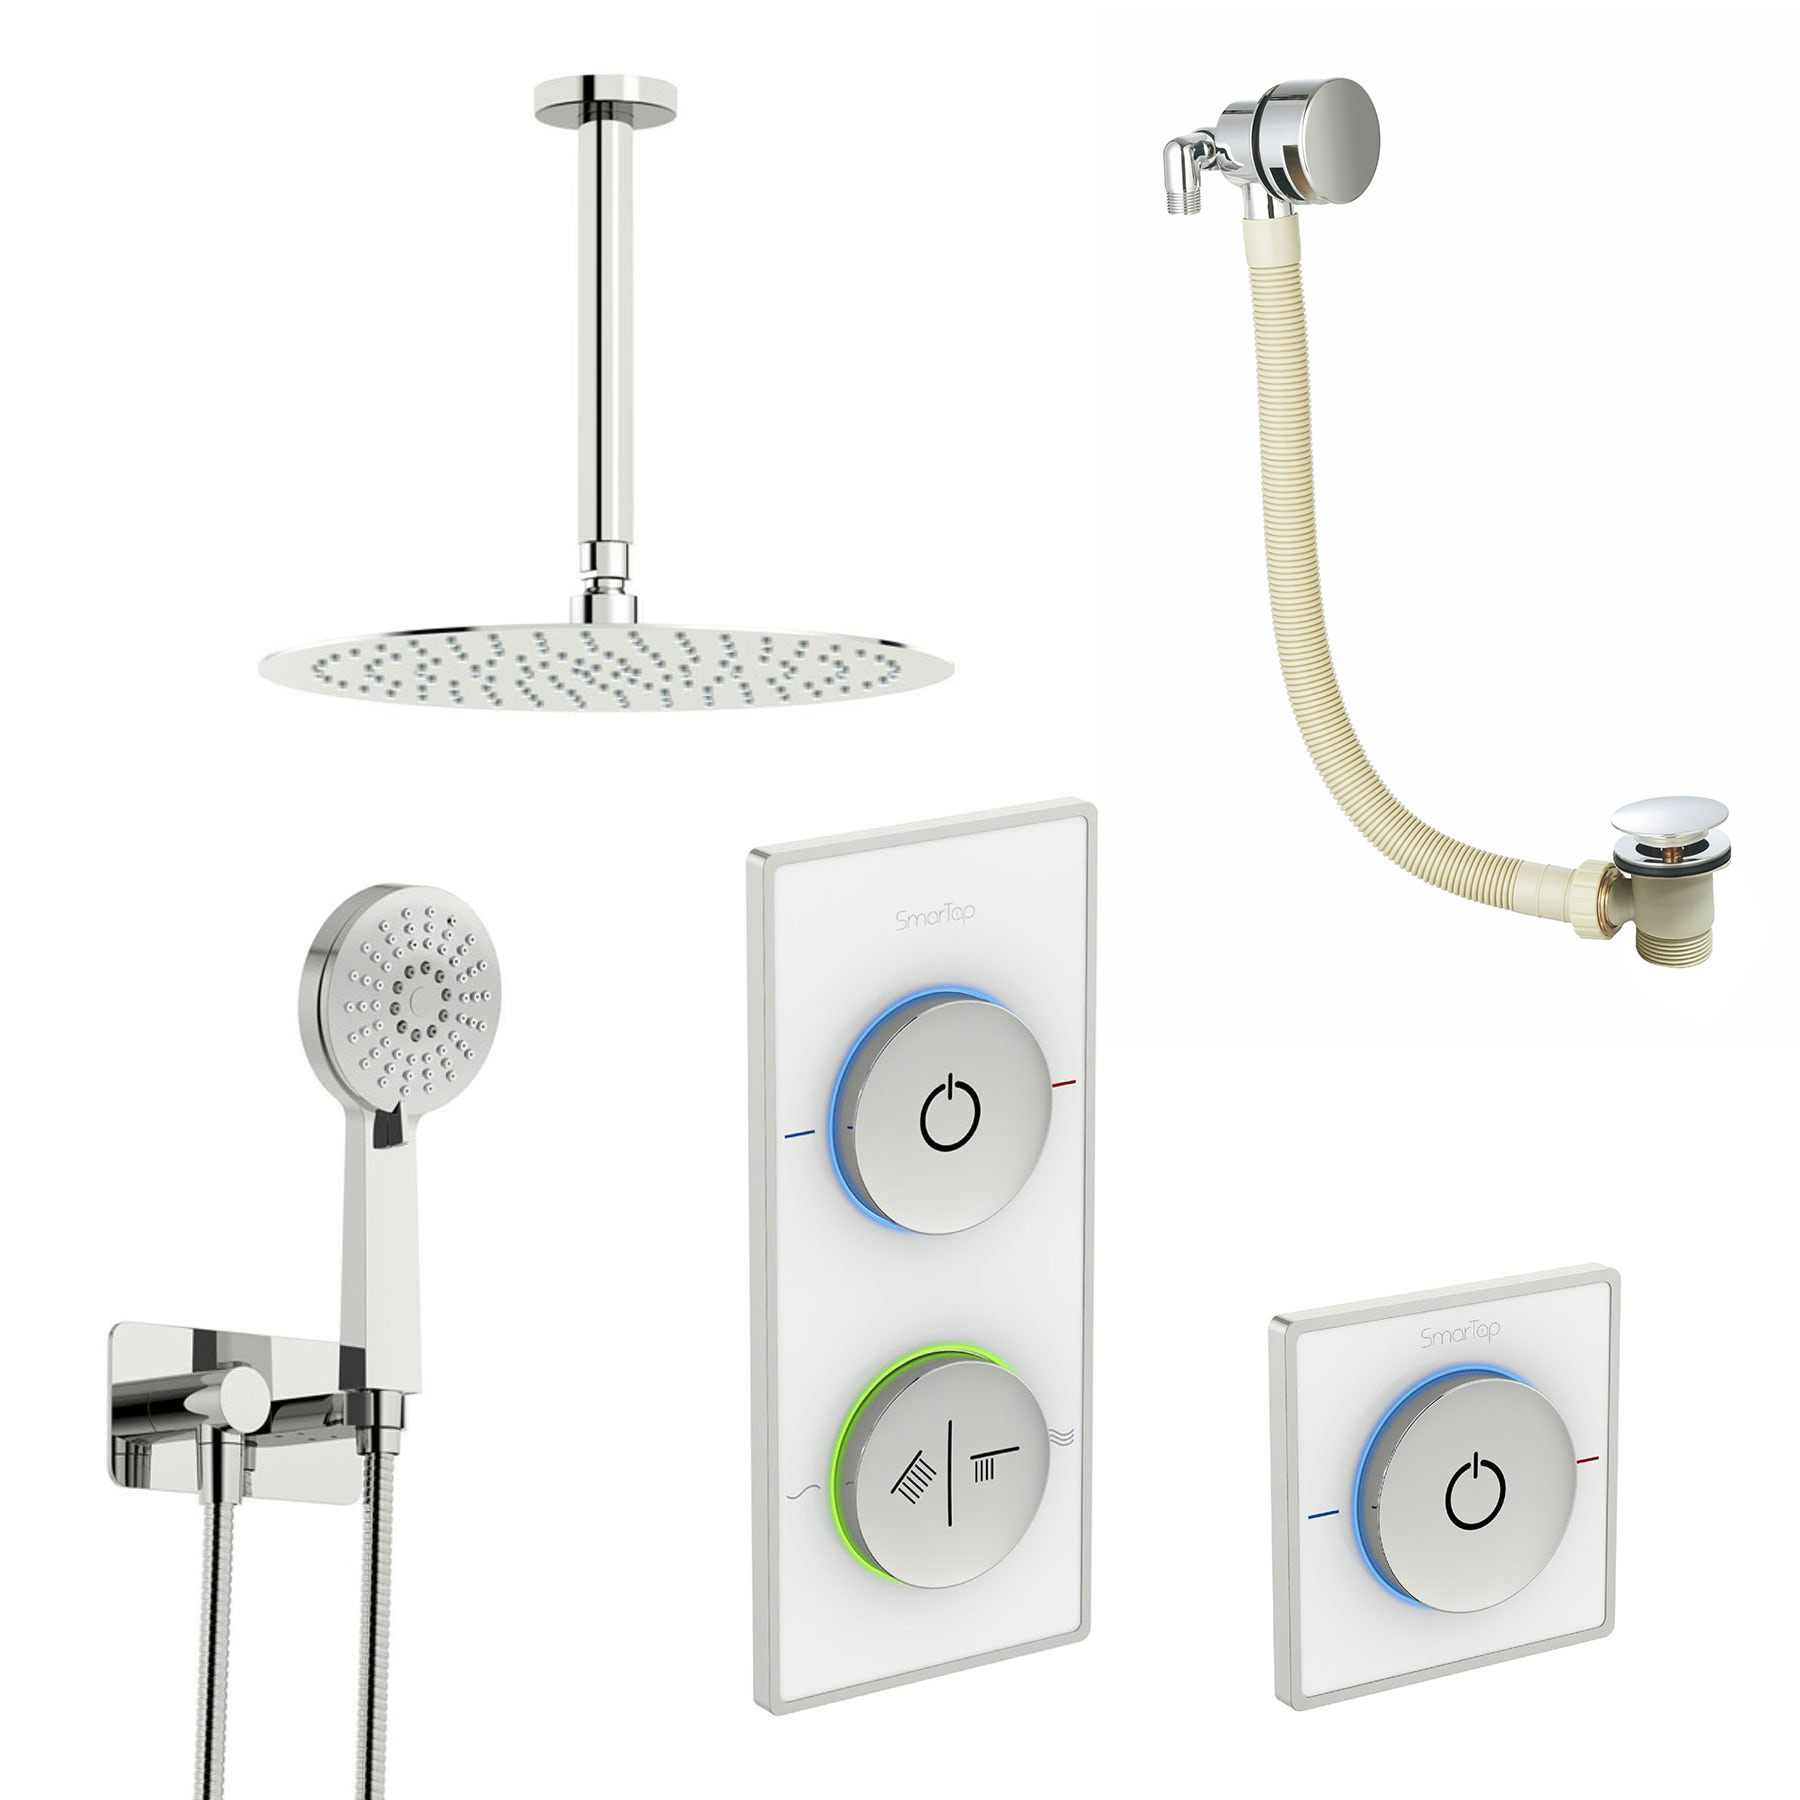 SmarTap white smart shower system with complete round ceiling shower outlet bath set